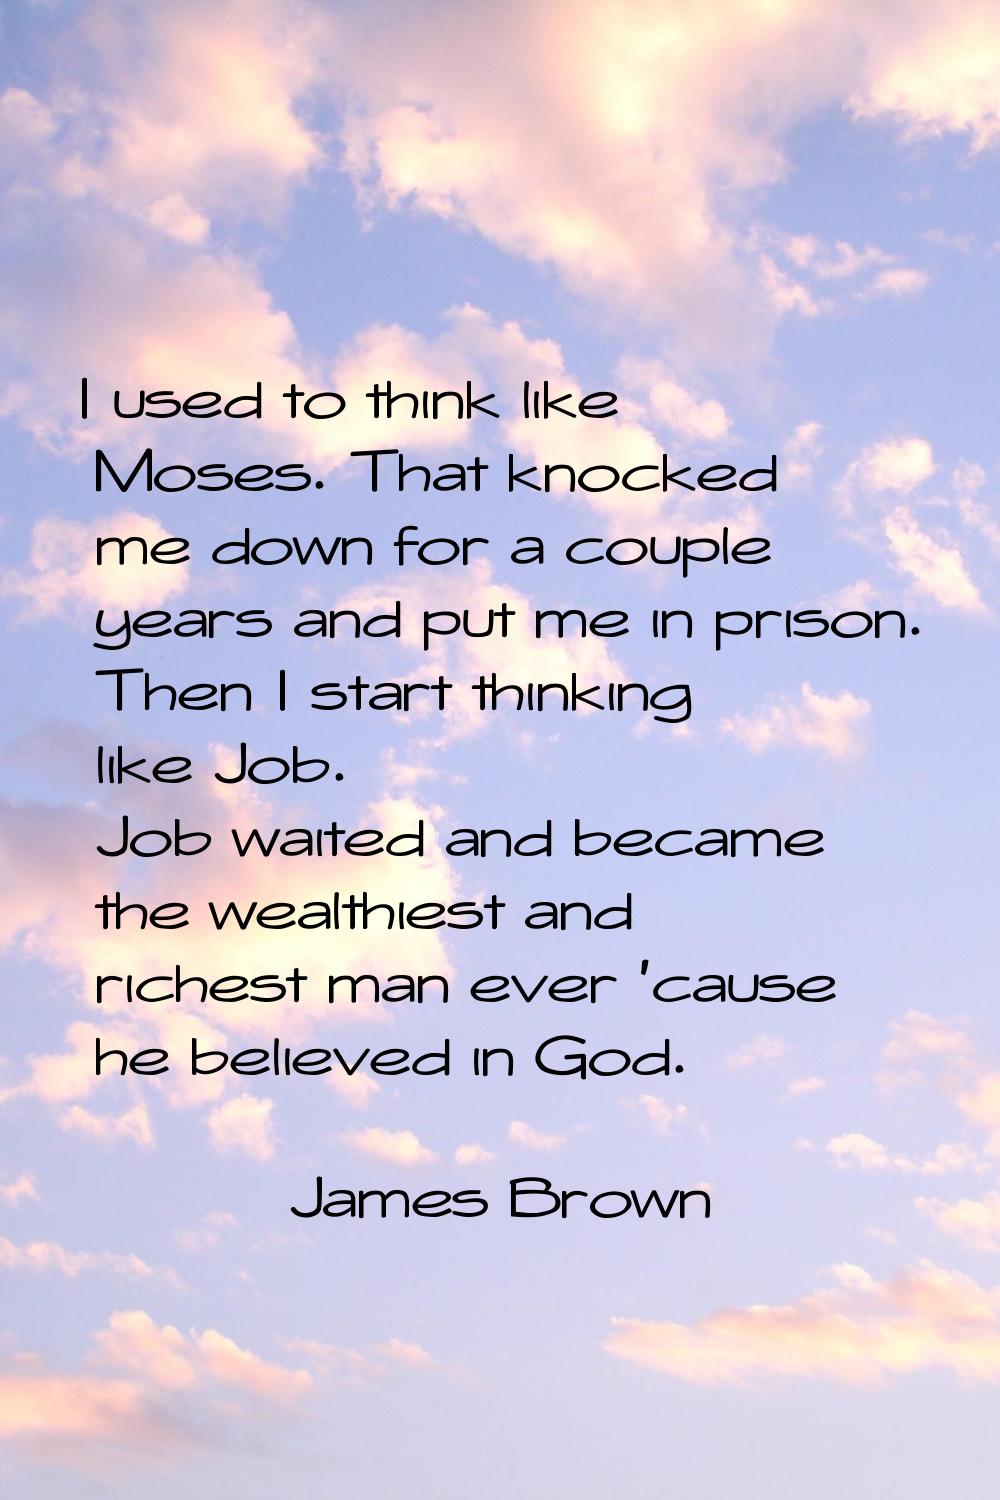 I used to think like Moses. That knocked me down for a couple years and put me in prison. Then I st